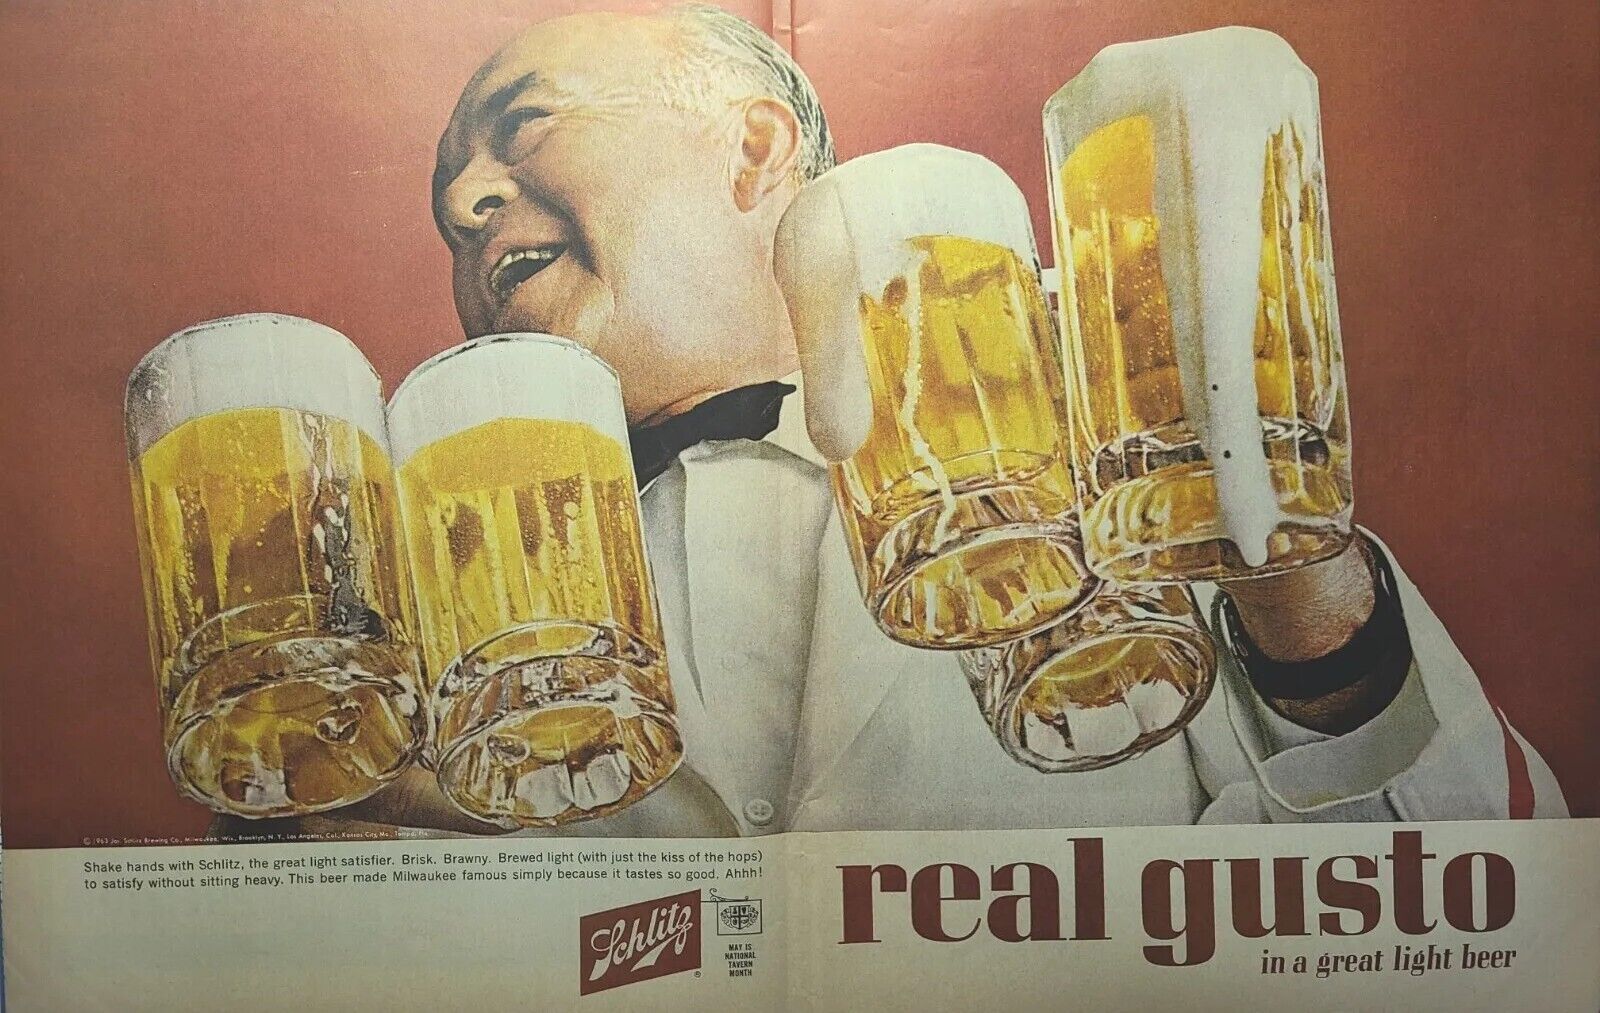 Schlitz Beer Real Gusto Barkeeper Just A Kiss Of The Hops Vintage Print Ad 1963